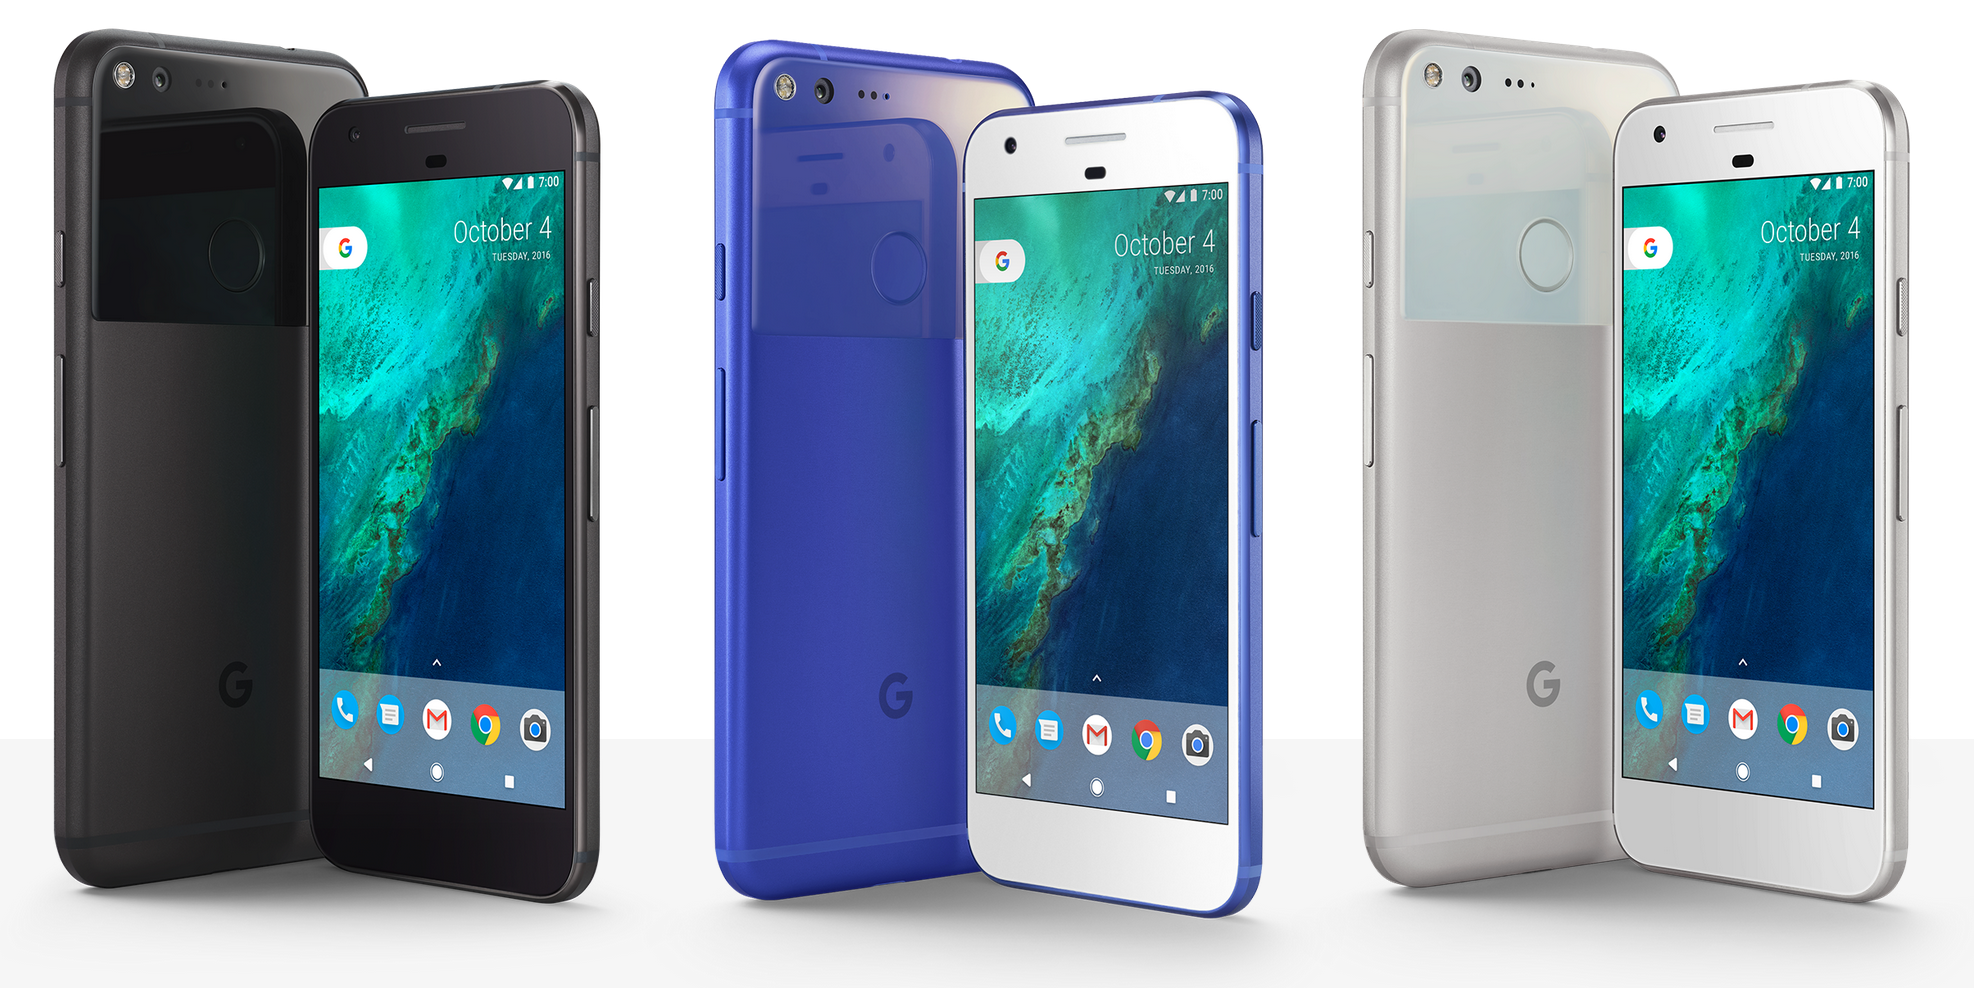 MADEBY.GOOGLE.COM Google released the Pixel and Pixel XL smartphones including Google Assistant, which the company claims is better than the iPhone's Siri. 